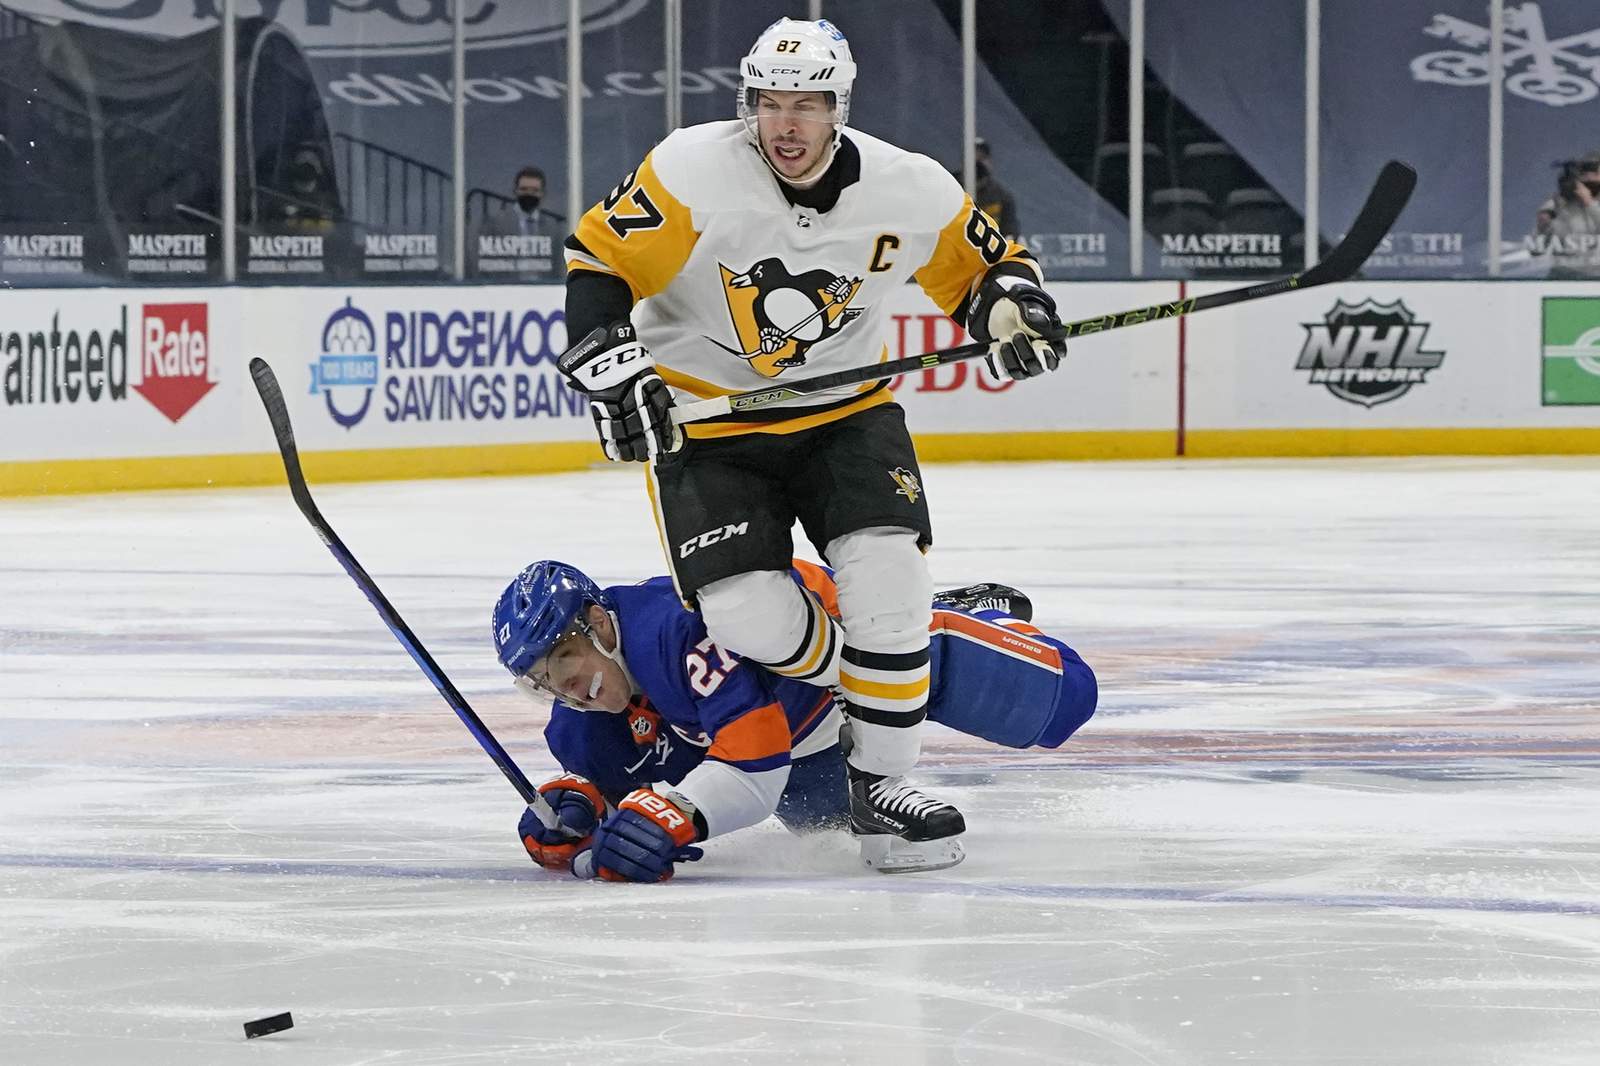 The Latest: Penguins captain Sidney Crosby cleared to play